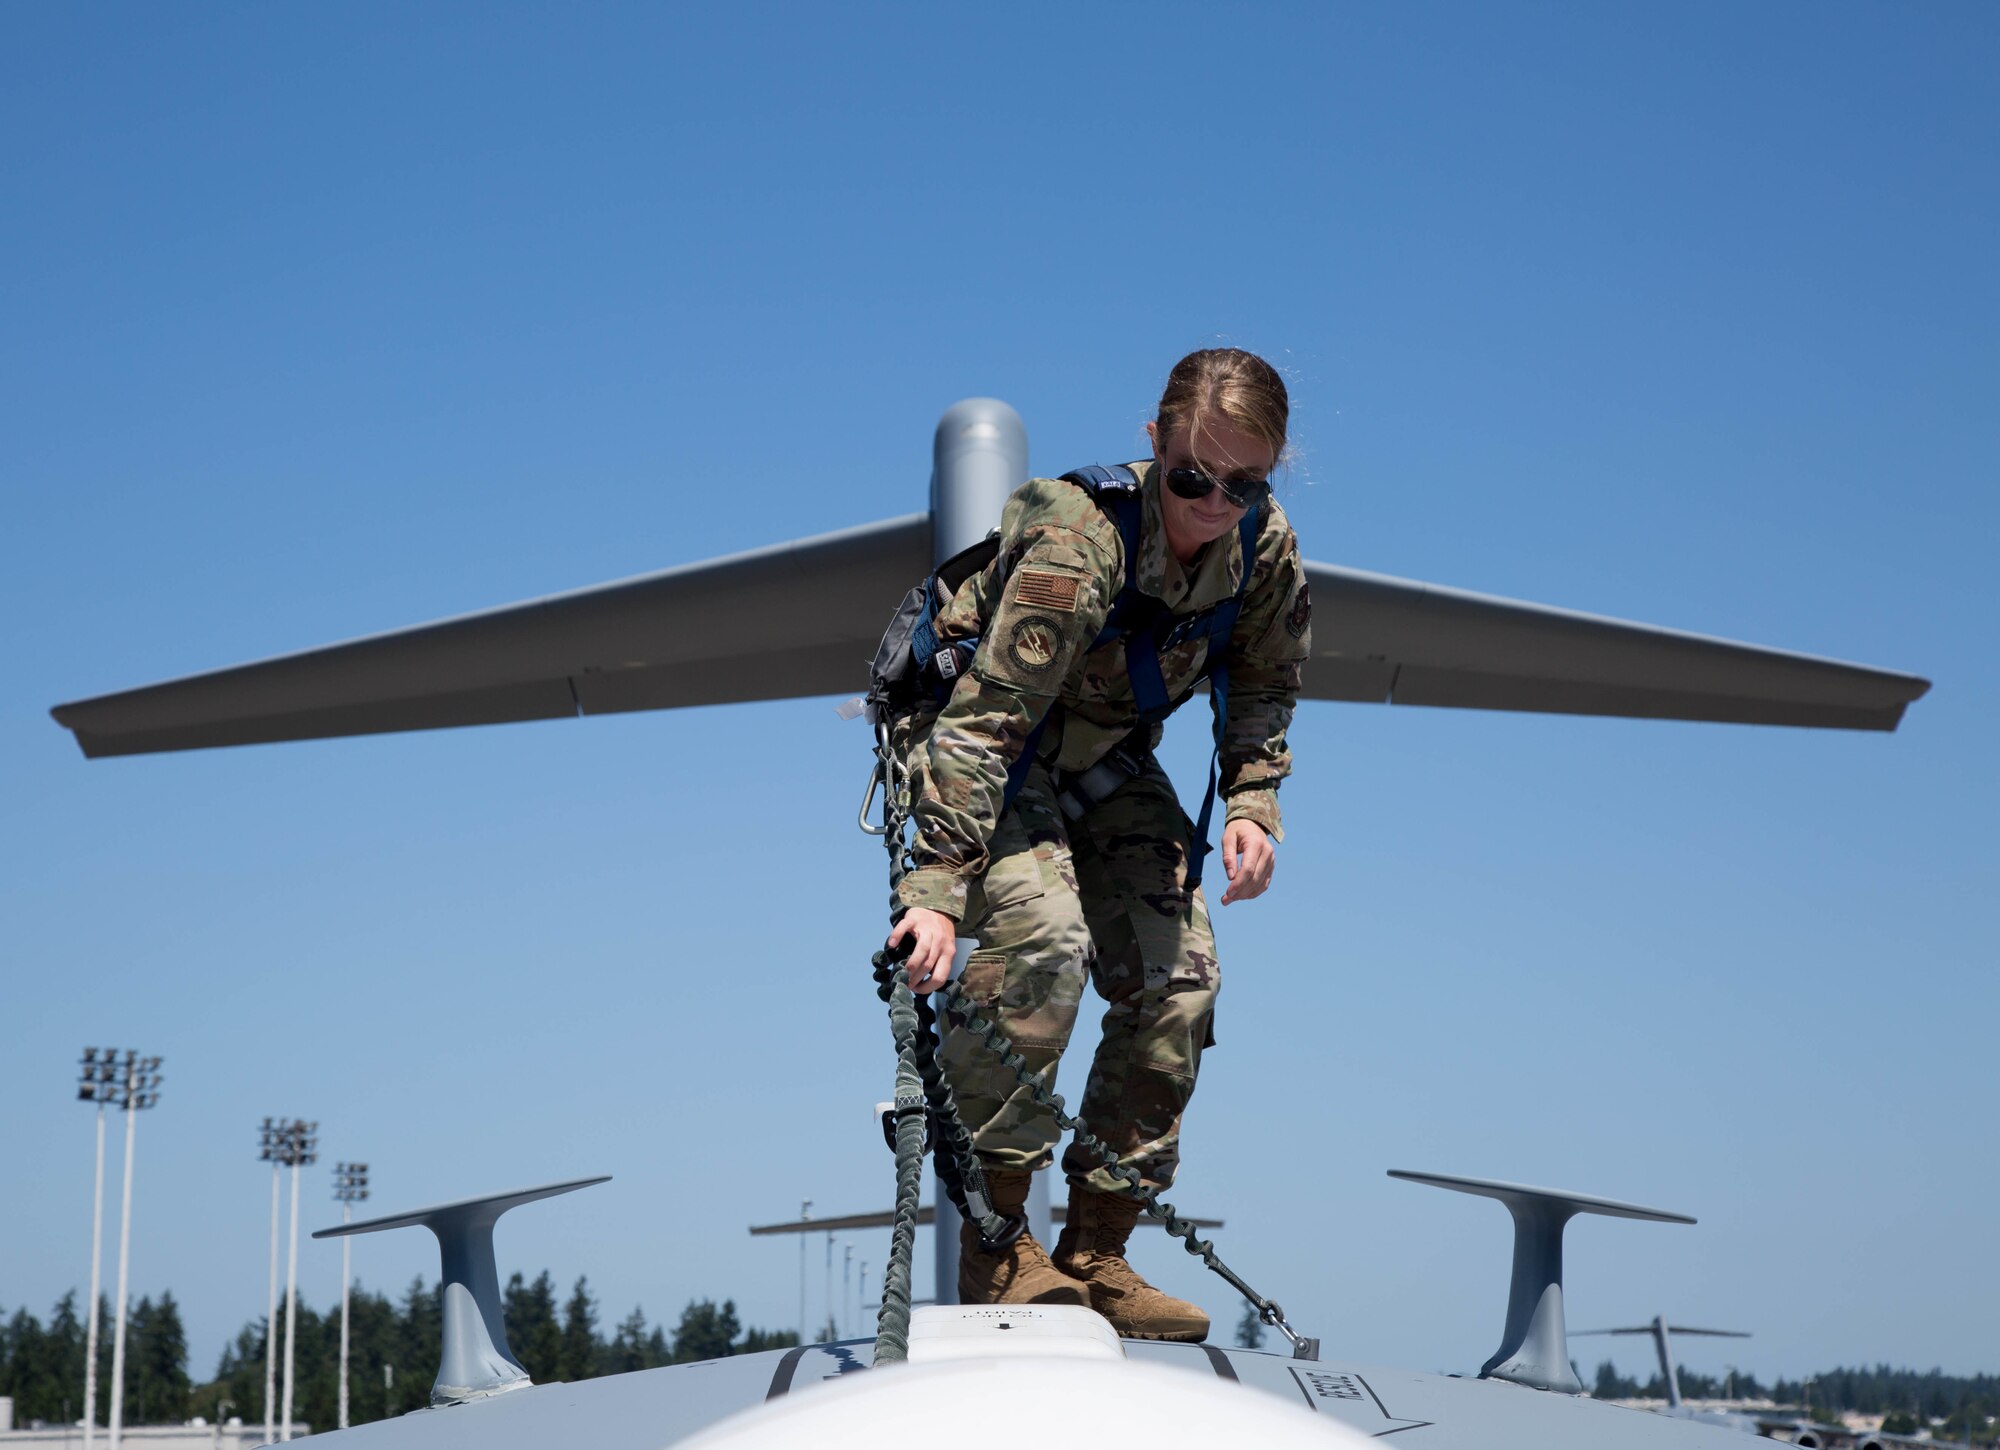 Airman inspects the top of a C-17 Globemaster III aircraft.